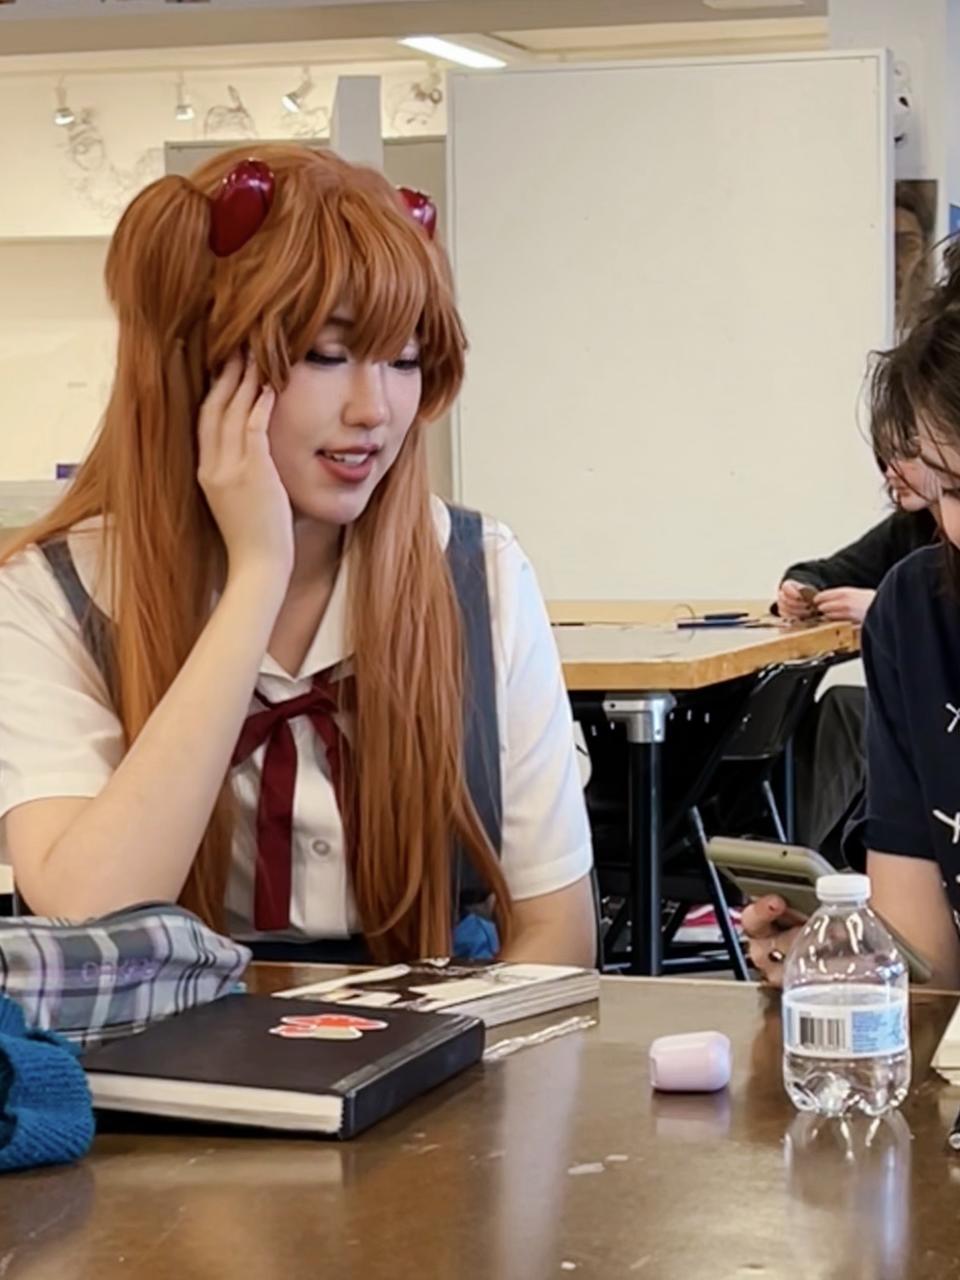 The author dressed as Asuka Langley Soryu, a female fictional character from the Japanese franchise Neon Genesis Evangelion, discussing development plans with a student.